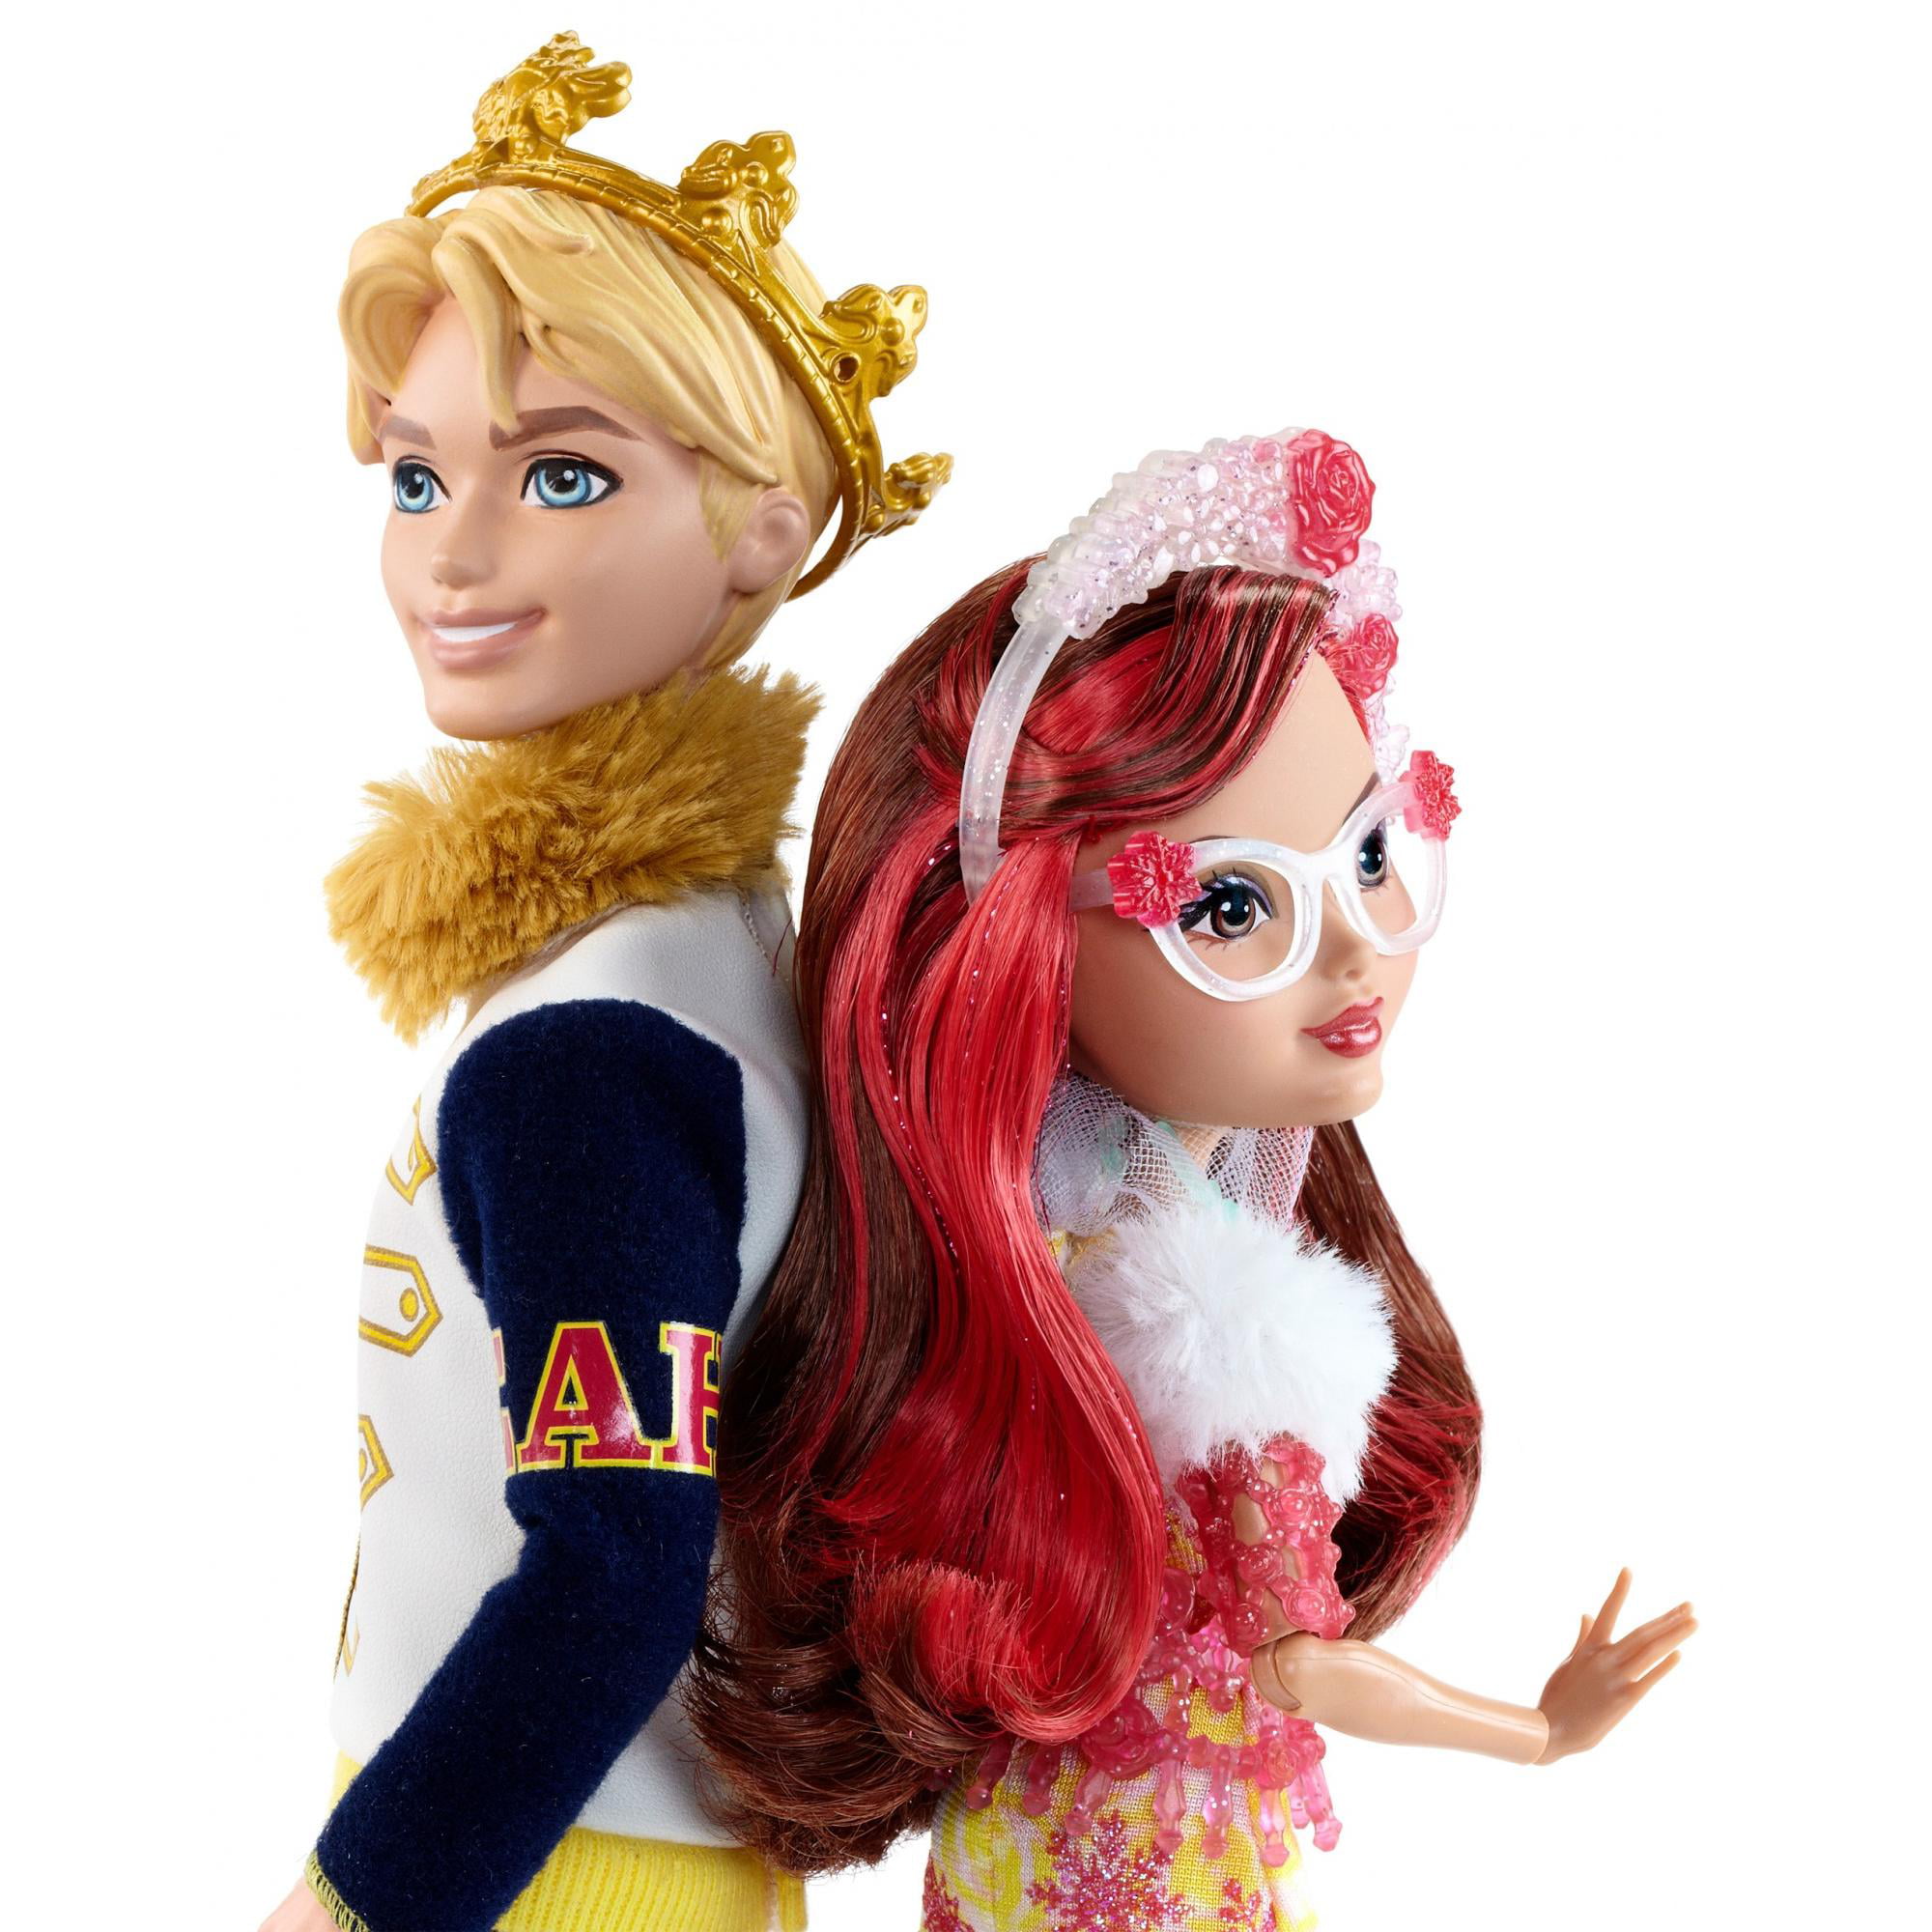 10.5” Mattel Ever After High Rosabella Beauty” Daughter Beauty Beast Doll  NRFB O